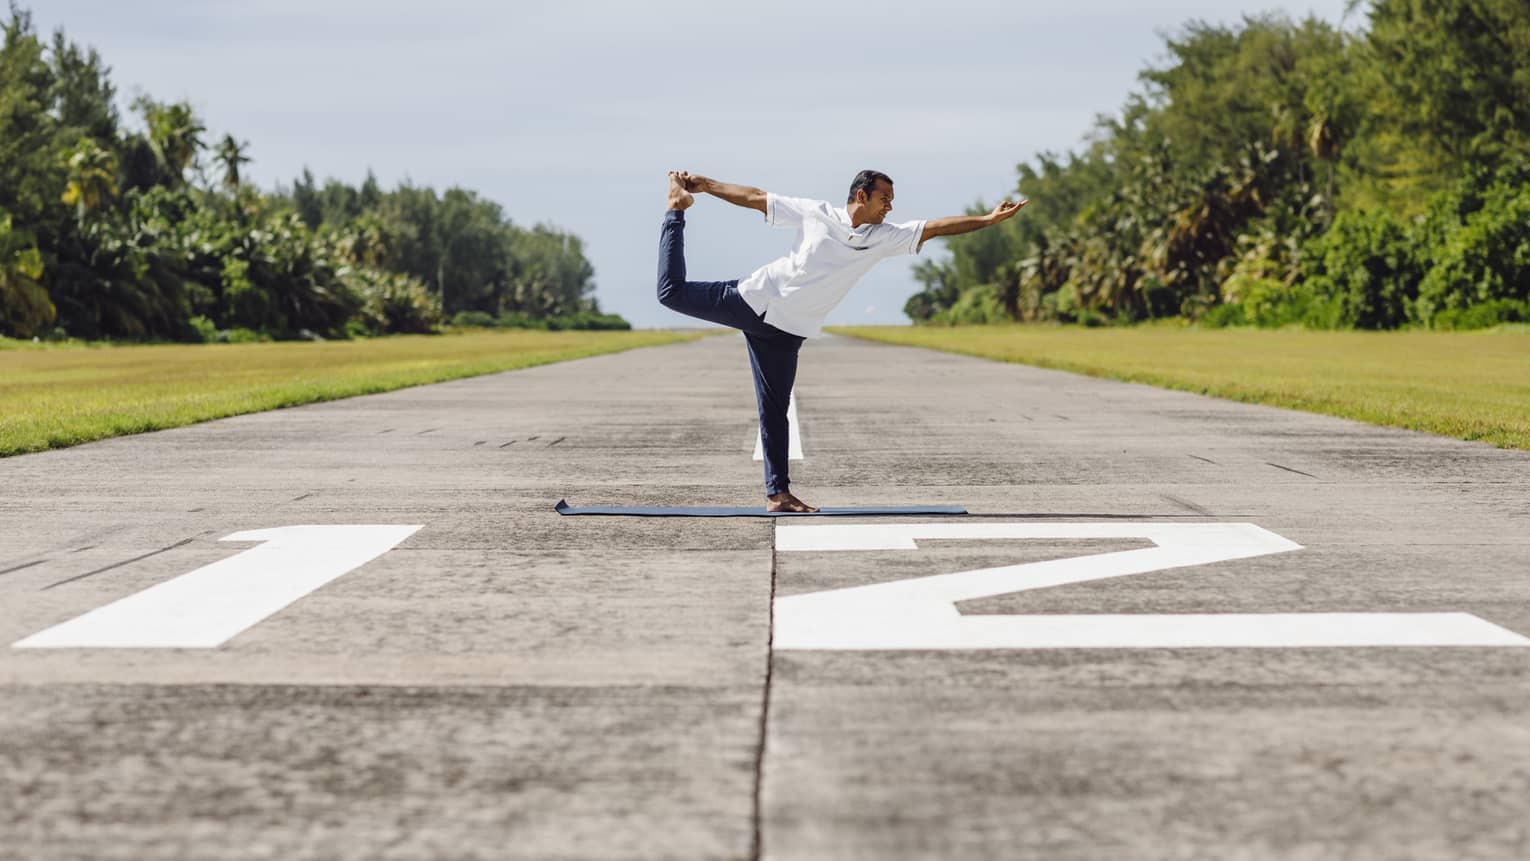 A man doing yoga – specifically ballerina pose – on an airplane runway